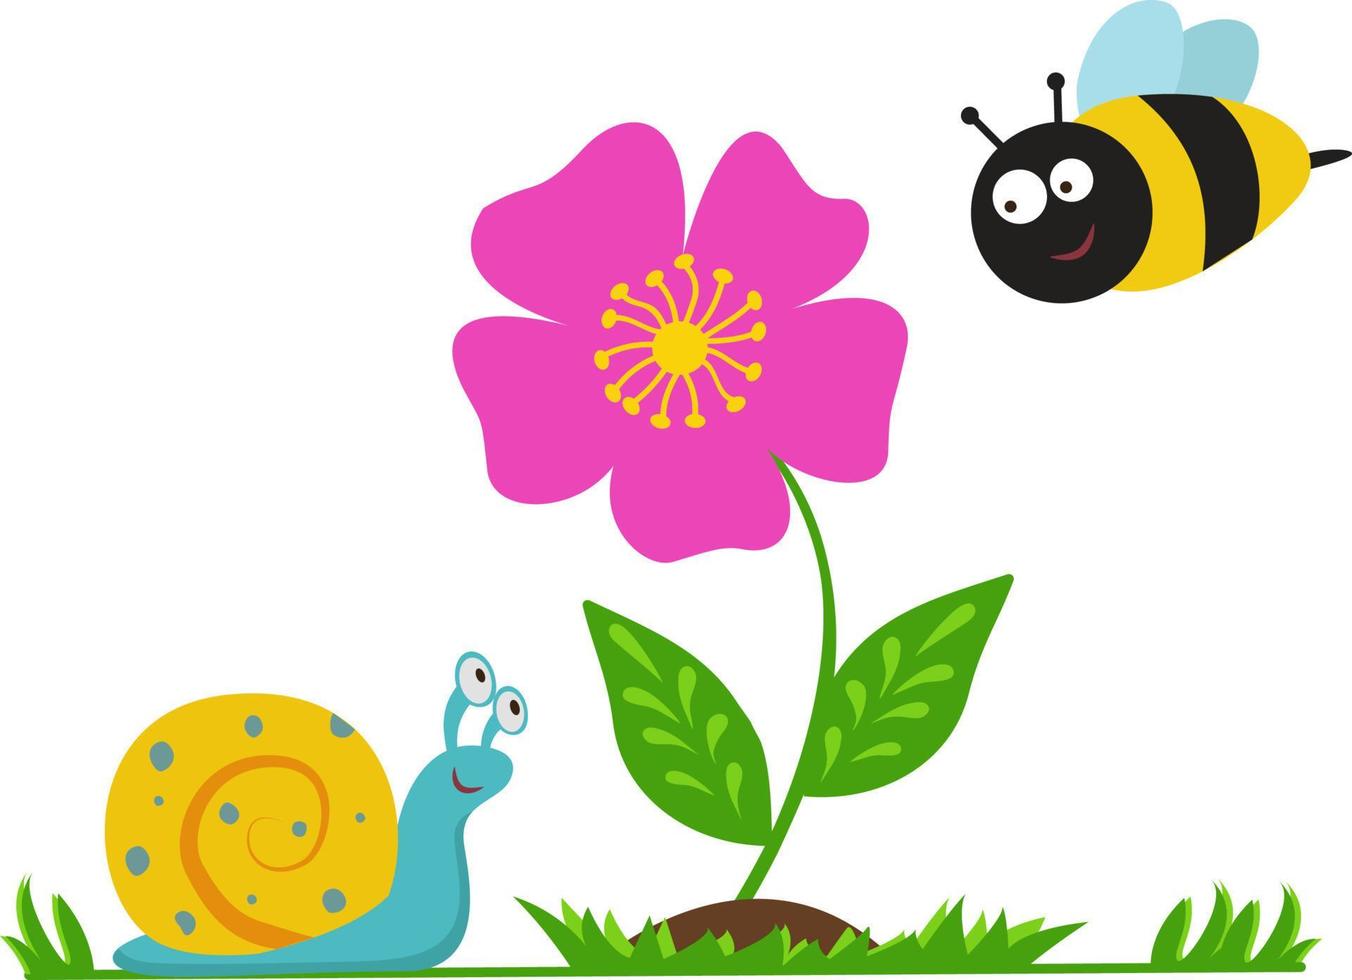 Vector illustration with a flower, a bee and a snail. Cute children's illustration. For children's books and magazines, design of children's rooms, marketing, advertising, web applications and design.